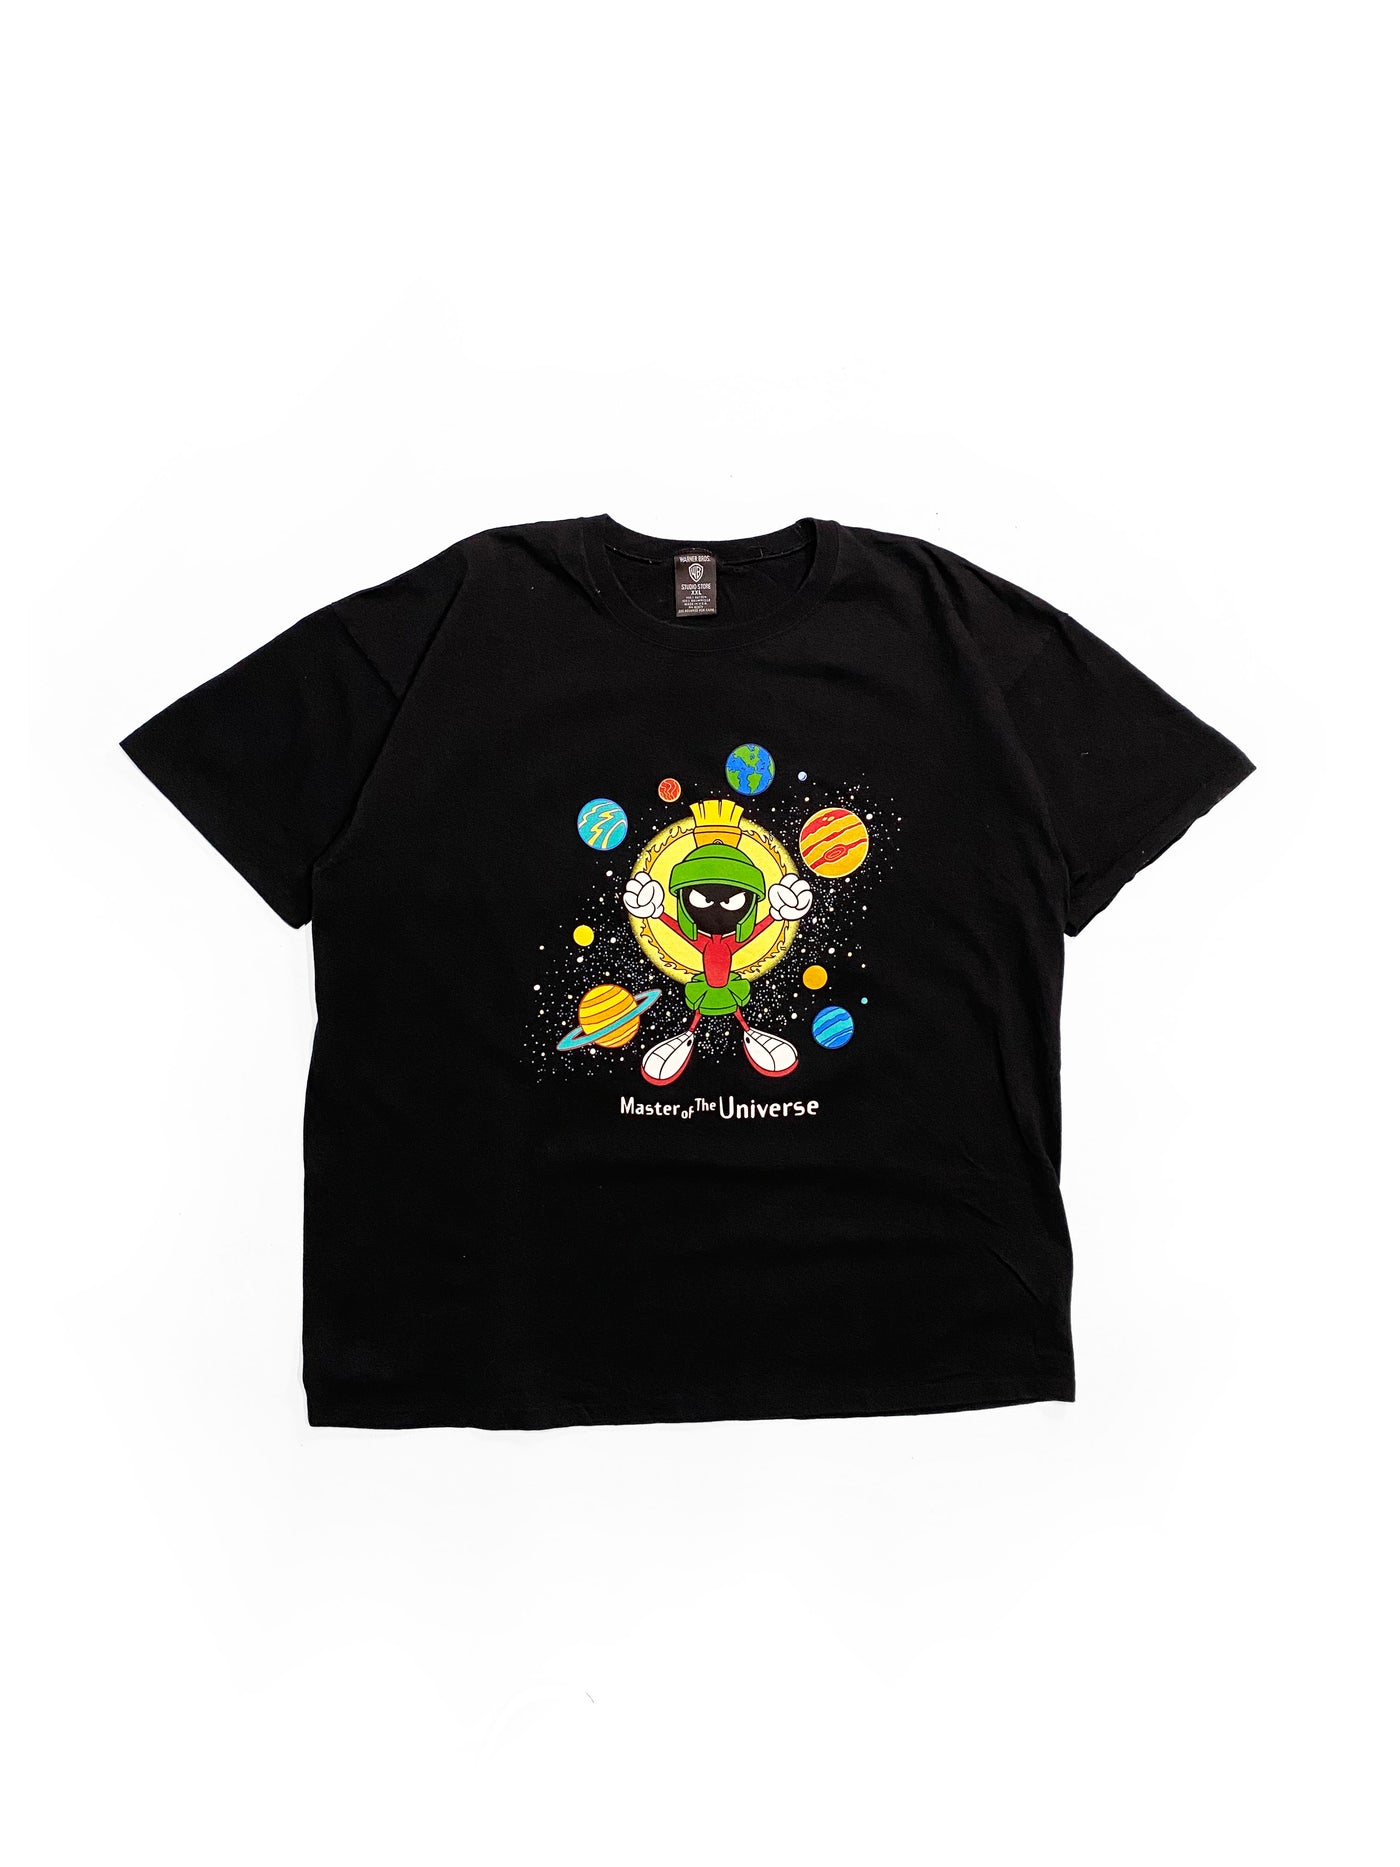 Vintage 1997 Marvin the Martian Master of the Universe T-Shirt